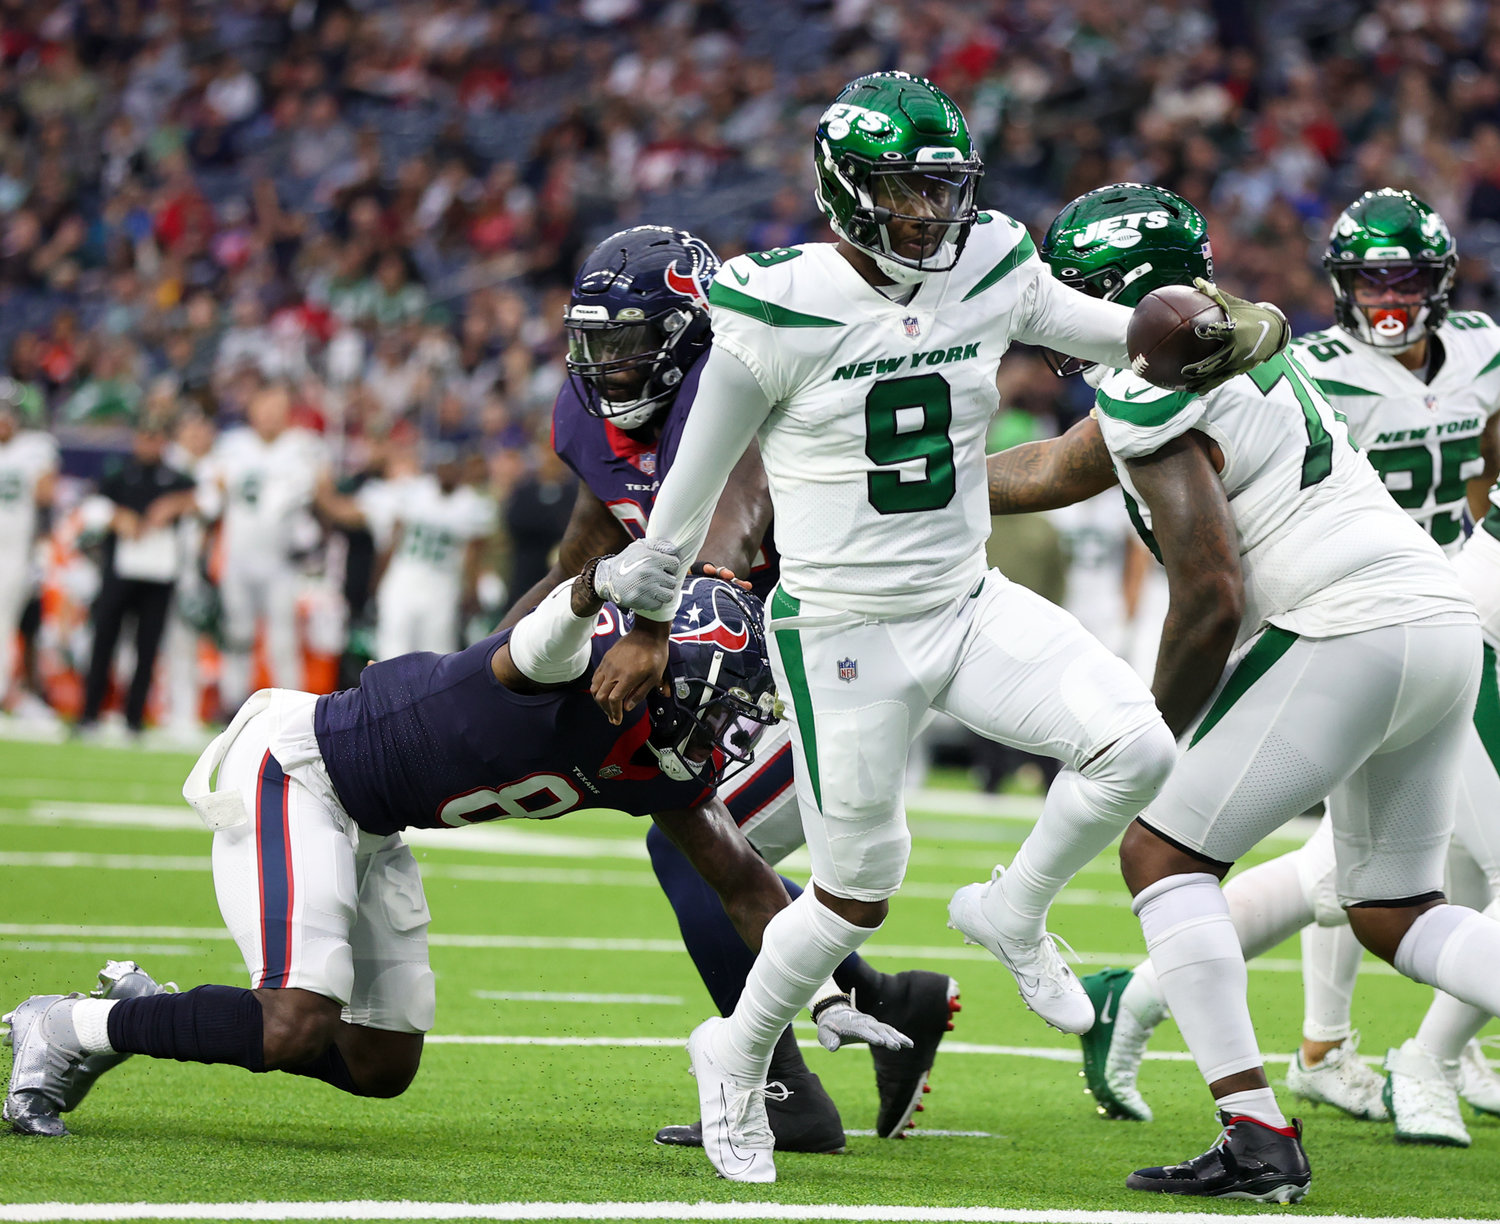 New York Jets quarterback Josh Johnson (9) carries the ball into the end zone for a 2-point conversion during an NFL game between the Houston Texans and the New York Jets on November 28, 2021 in Houston, Texas.